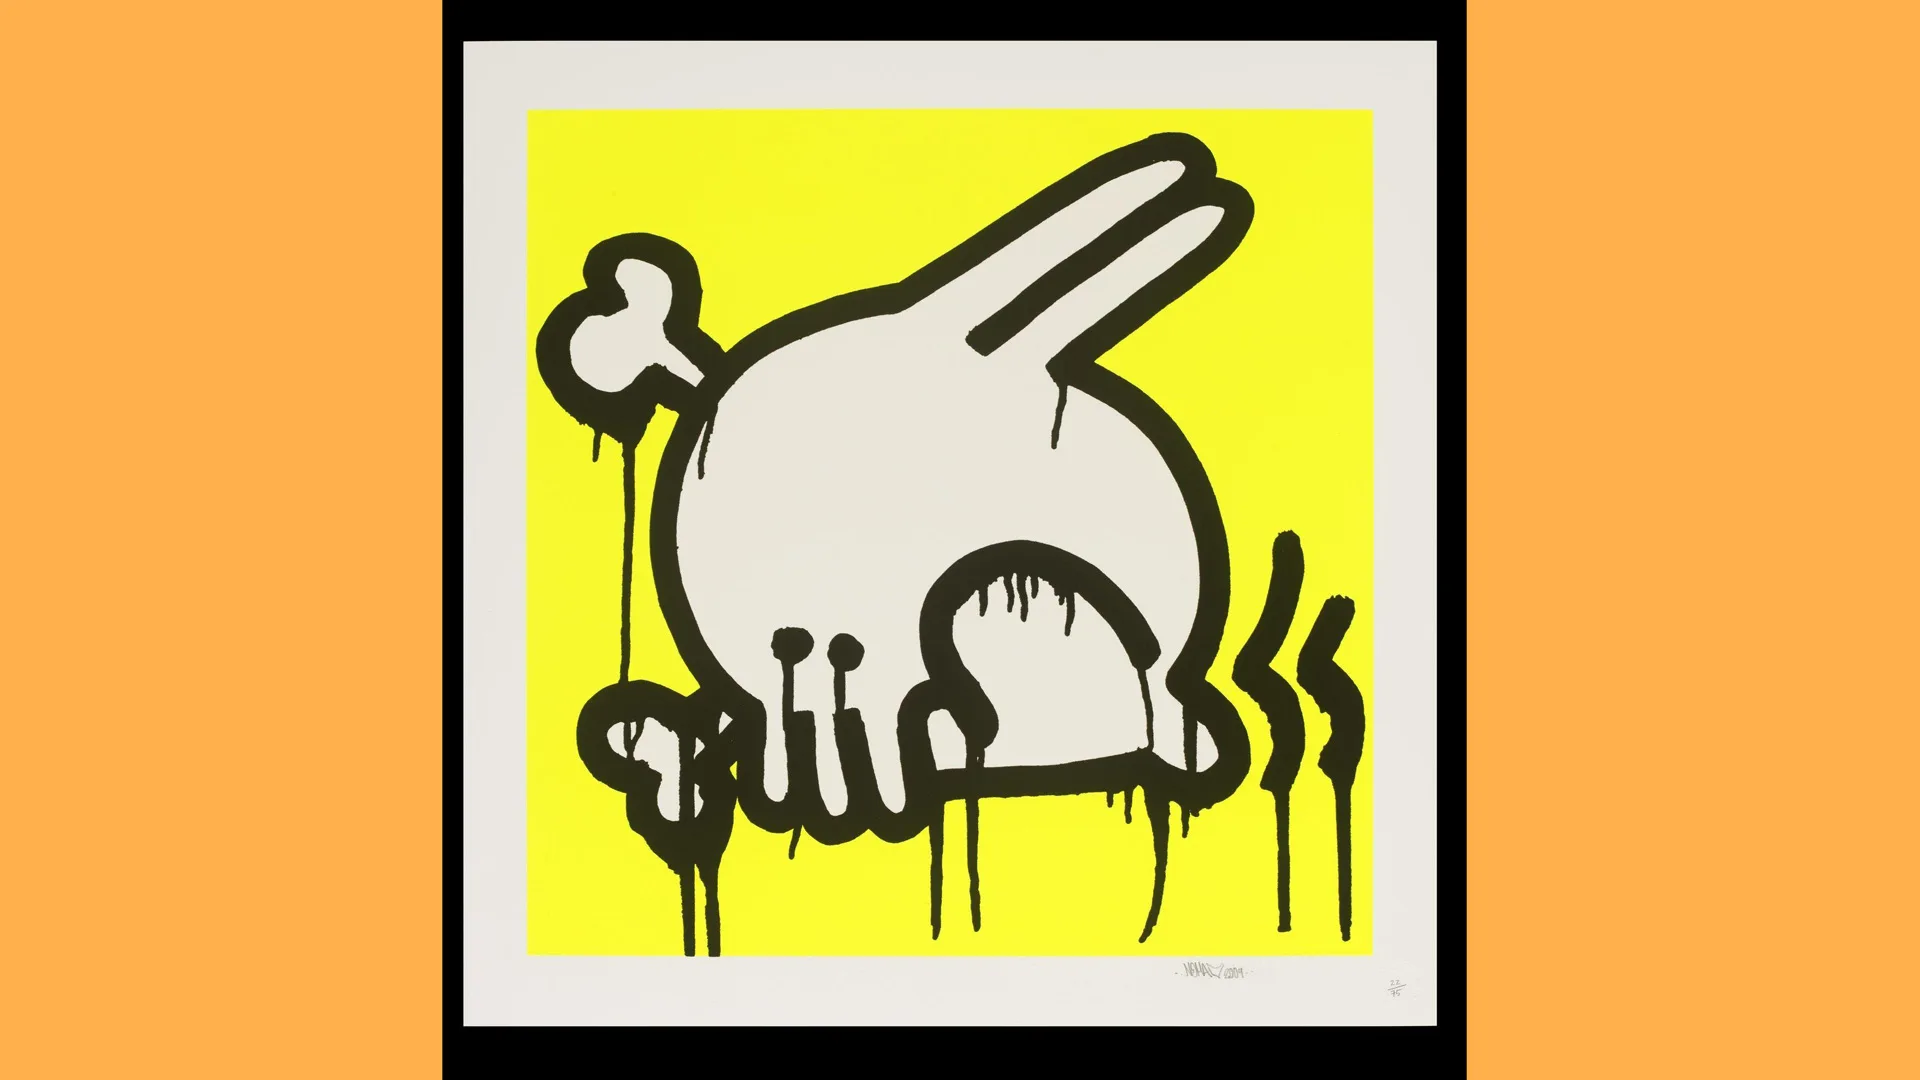 A print by the artist Nomad showing a drawing of a bunny with a skull face and bones sticking out of it's head on a yellow background in a black frame. The image is bordered with orange background.